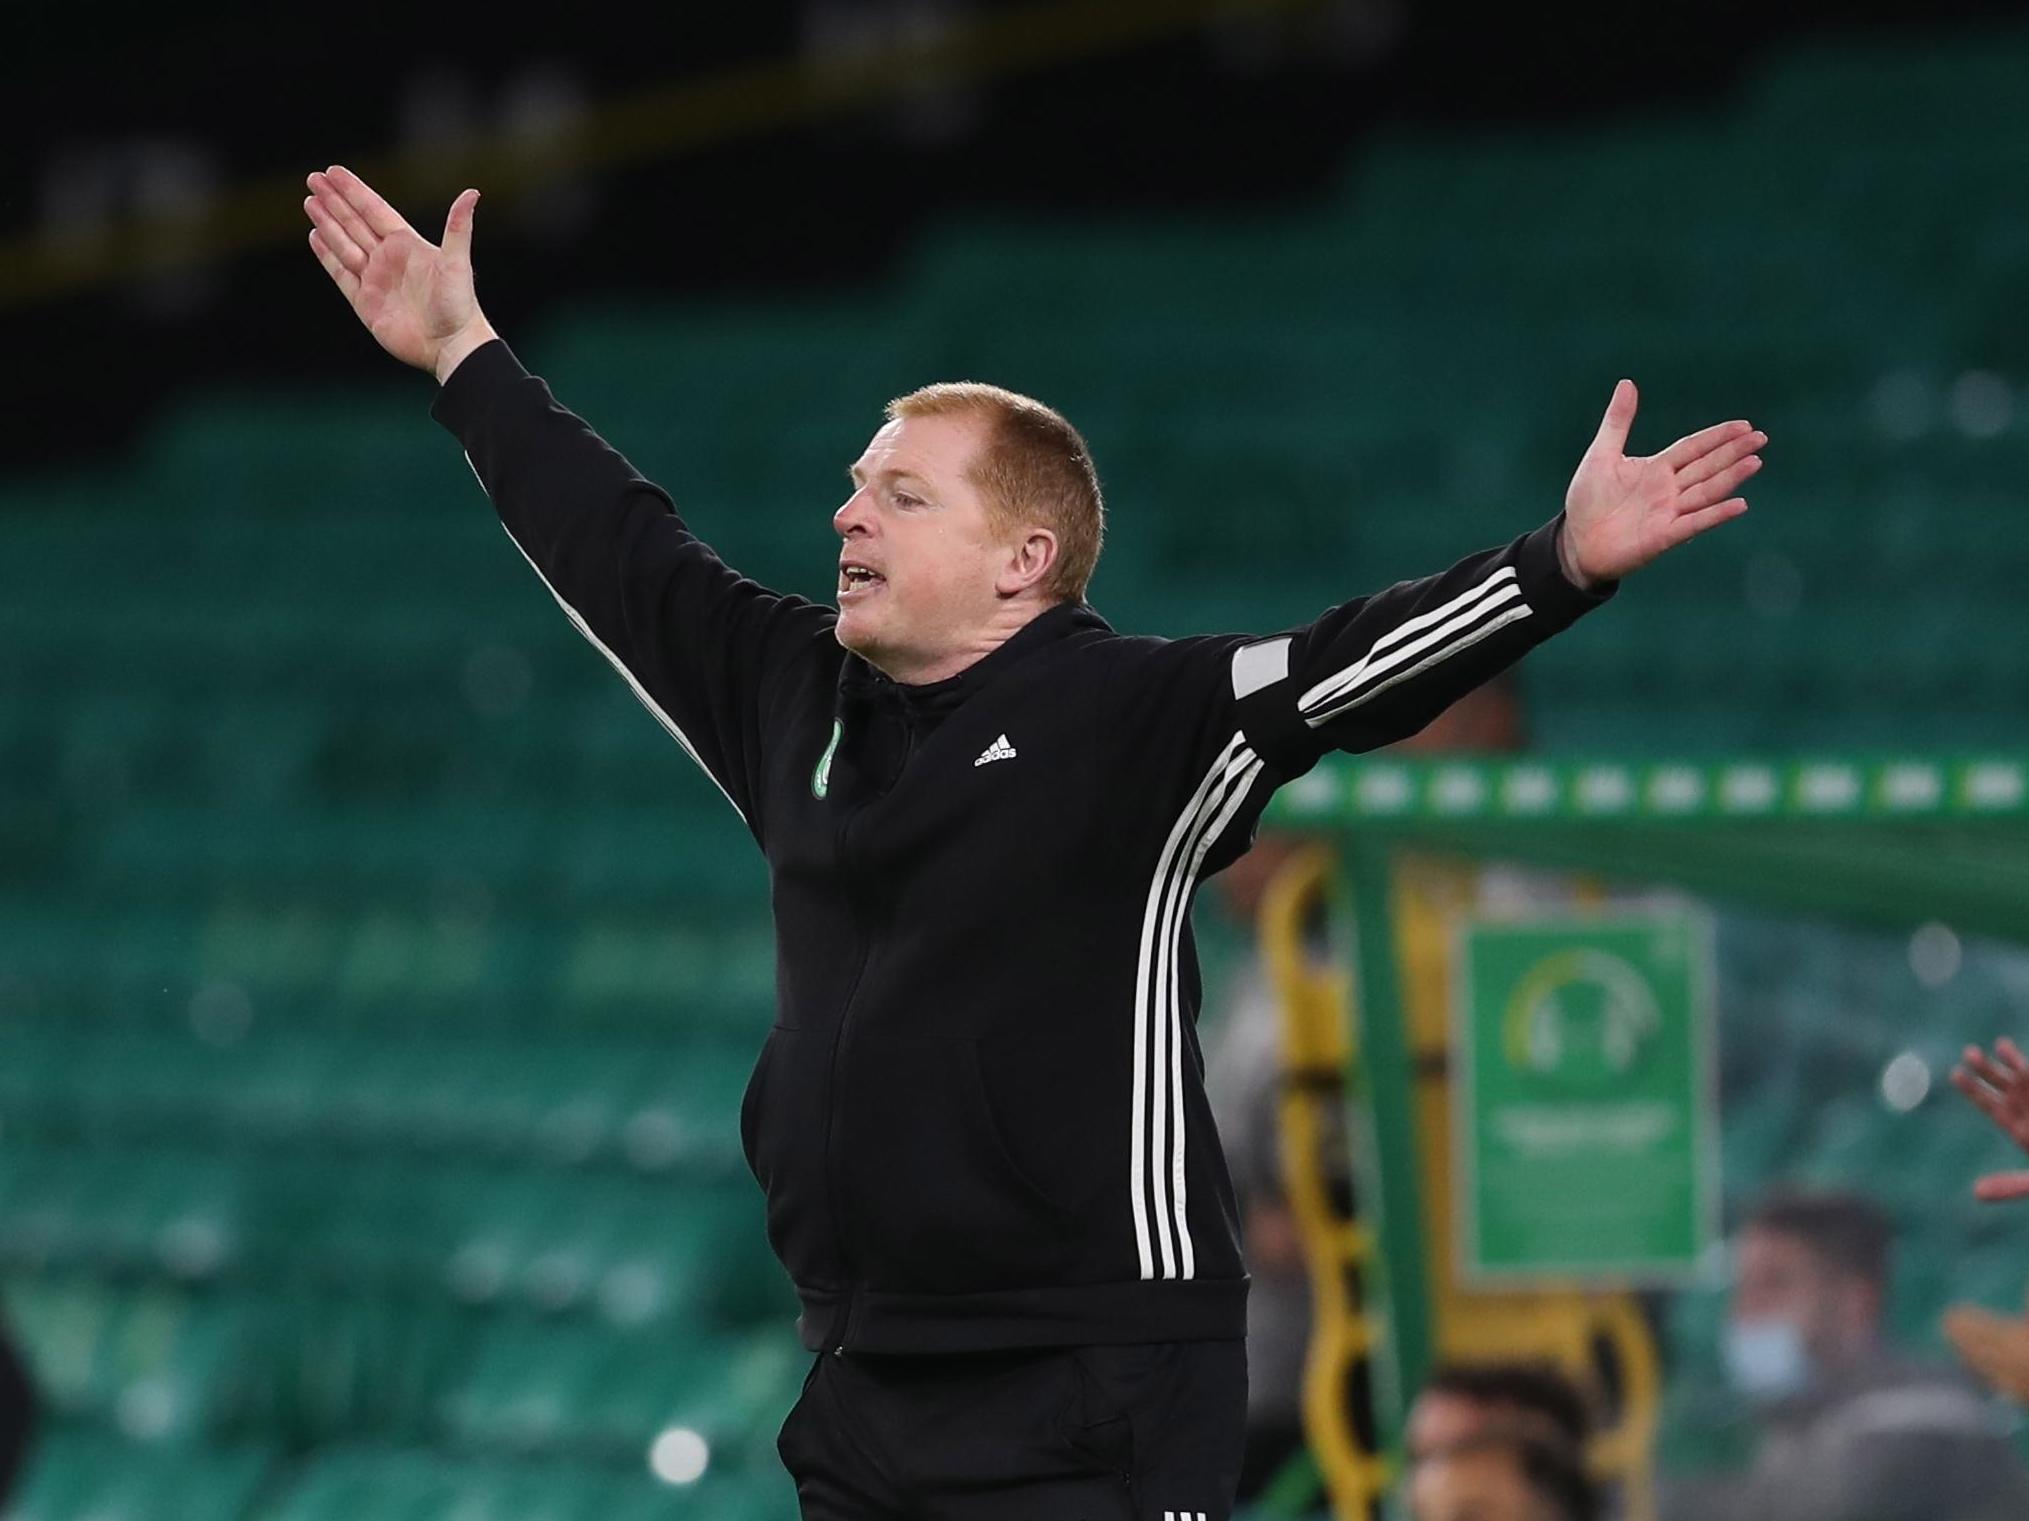 Celtic manager Neil Lennon was outraged by Bolingoli’s actions